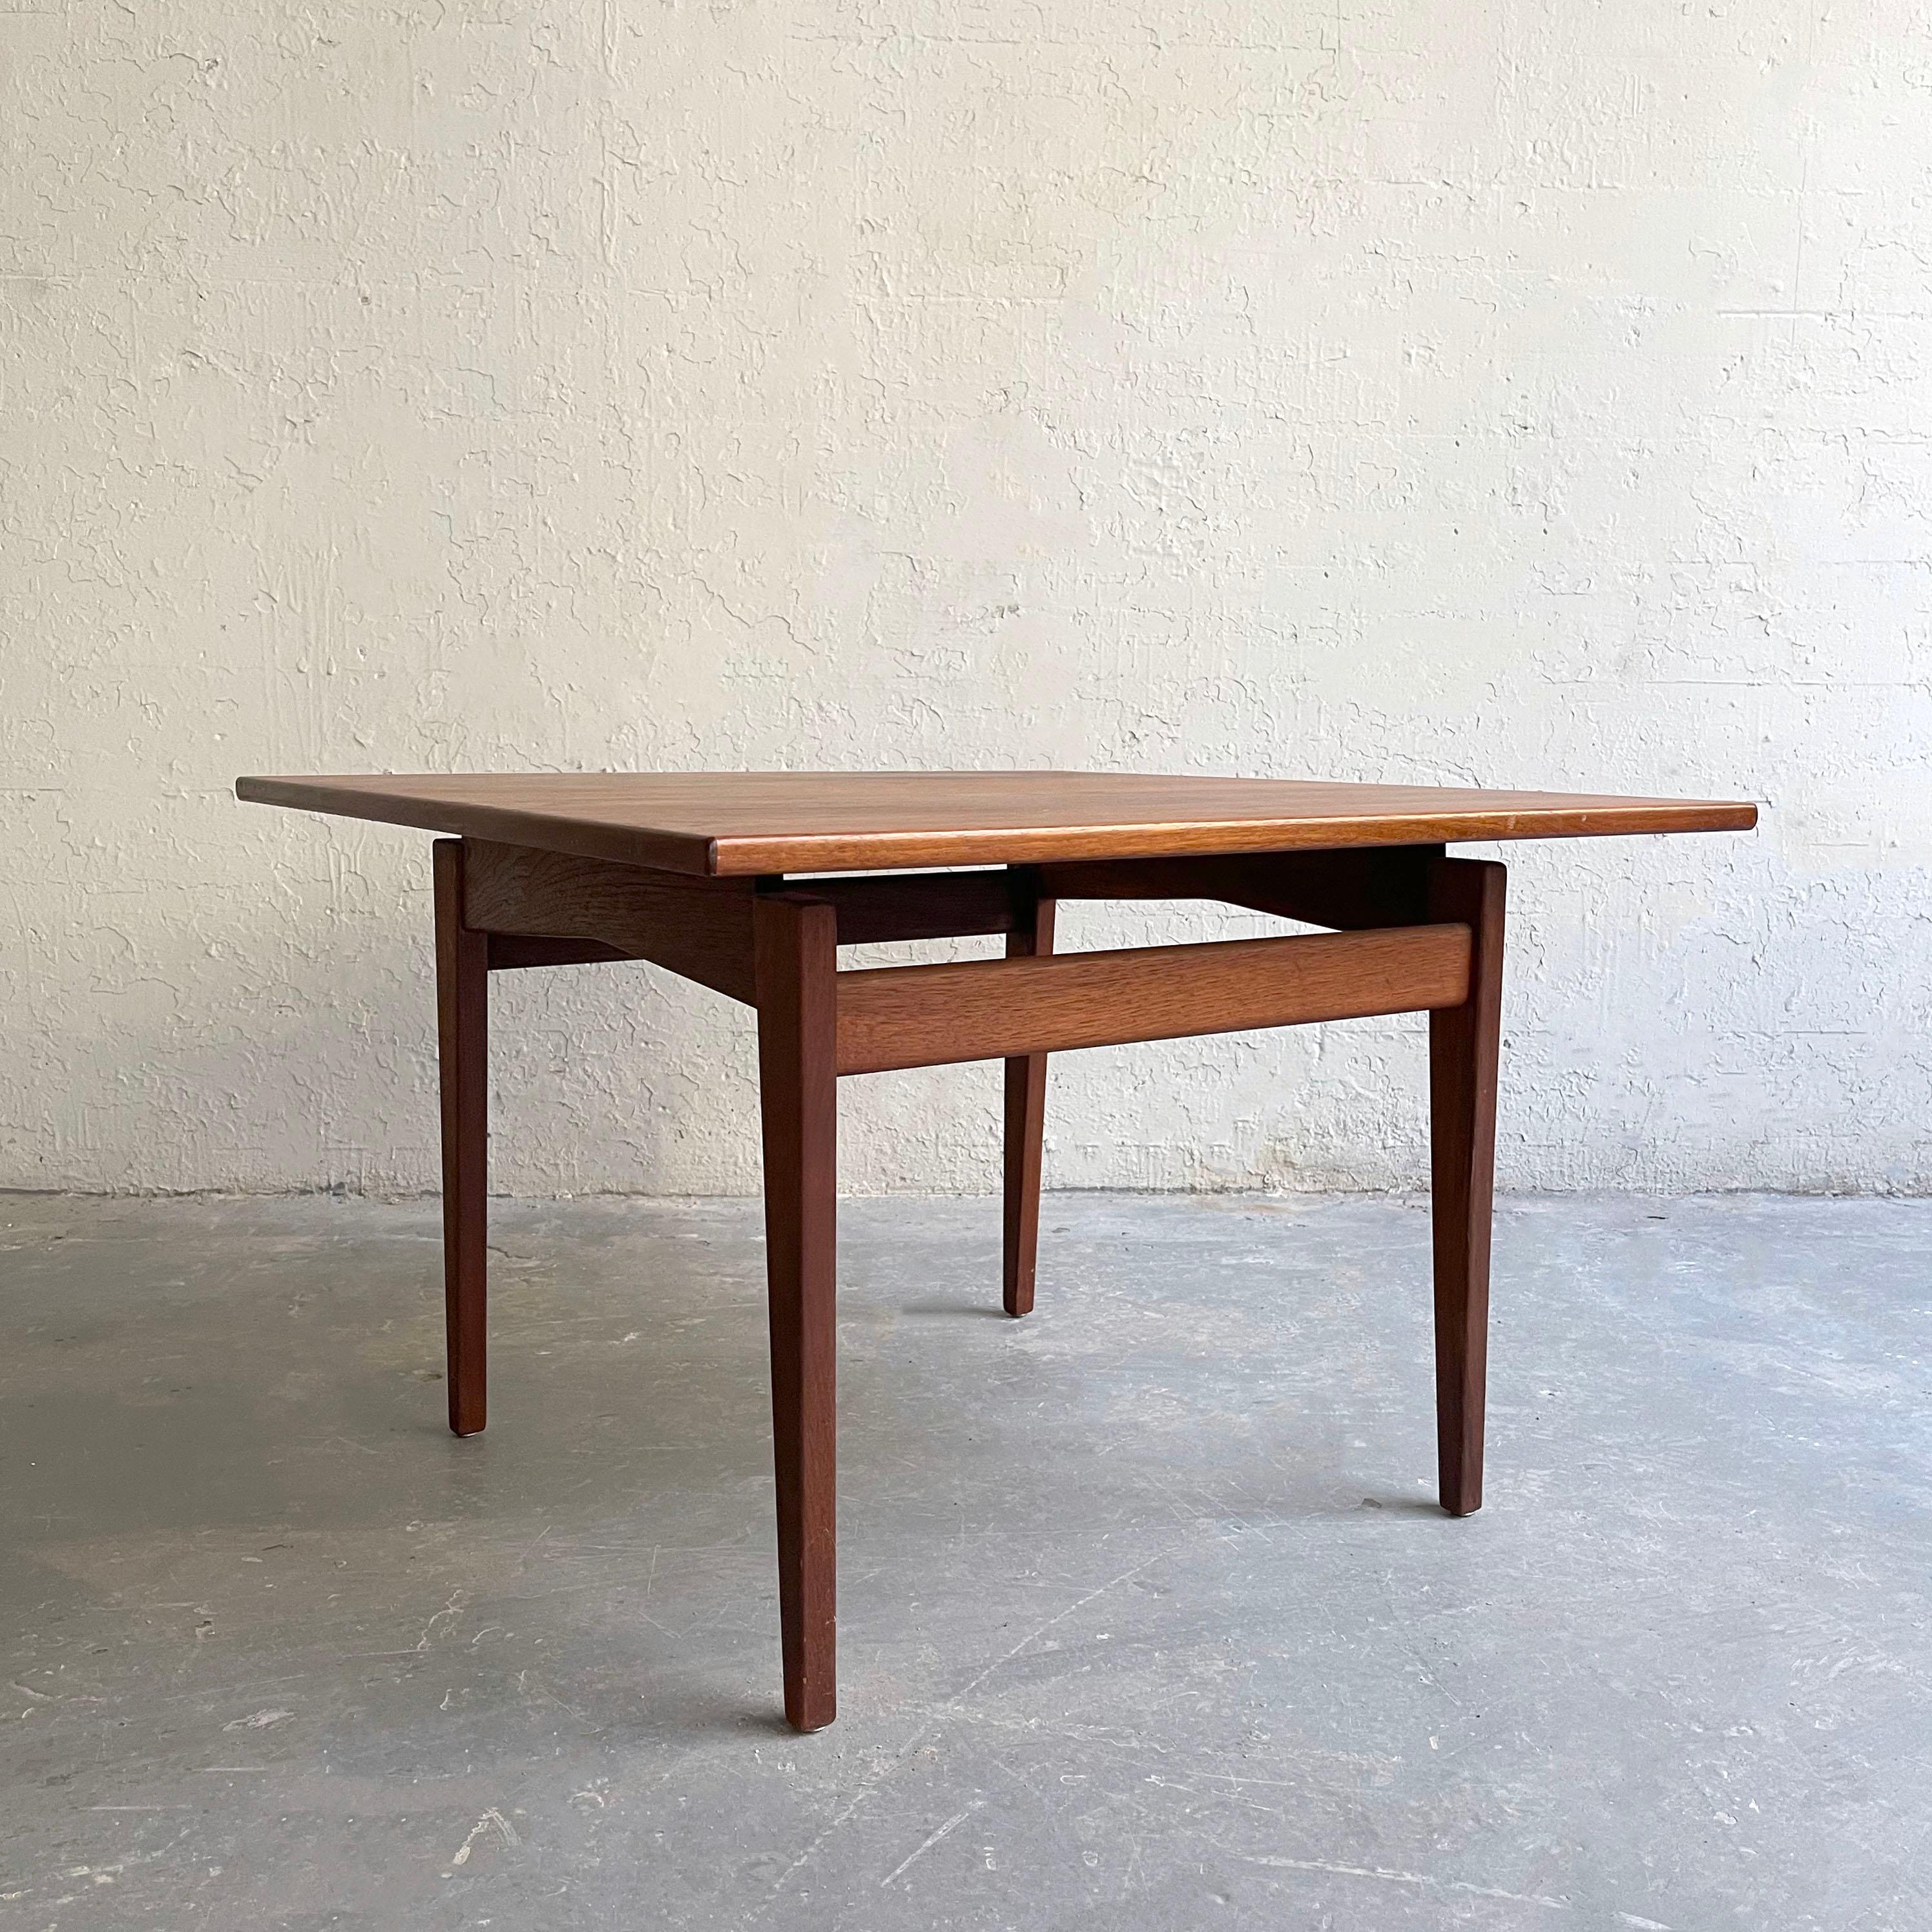 Mid-Century Modern, square walnut side table by Jens Risom features a floating top with sculptural base. At 21 inches height this table can work as a coffee table as well.
  